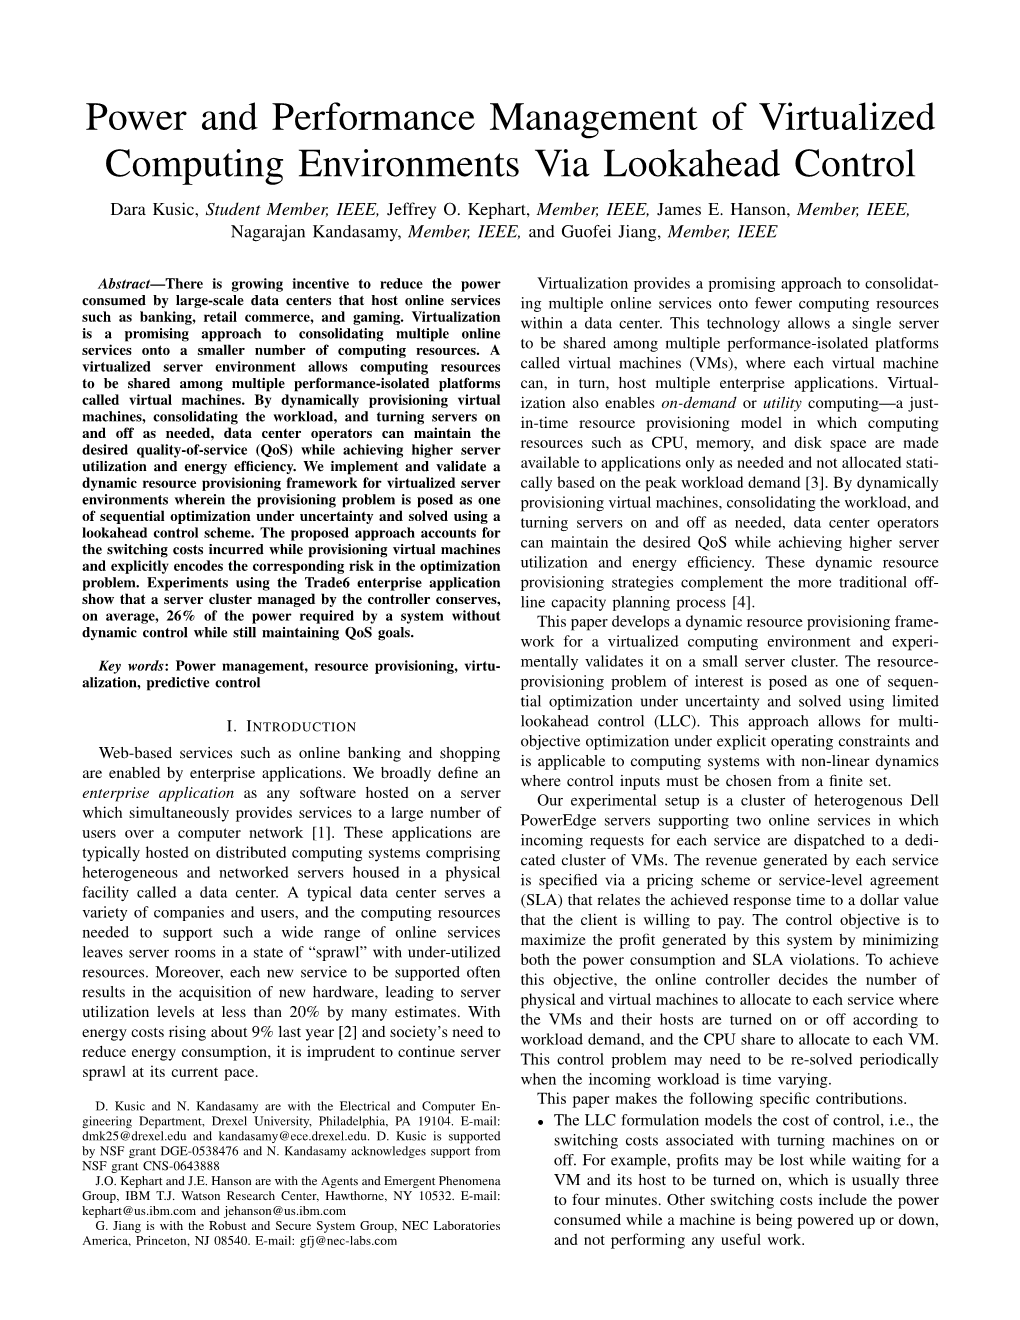 Power and Performance Management of Virtualized Computing Environments Via Lookahead Control Dara Kusic, Student Member, IEEE, Jeffrey O